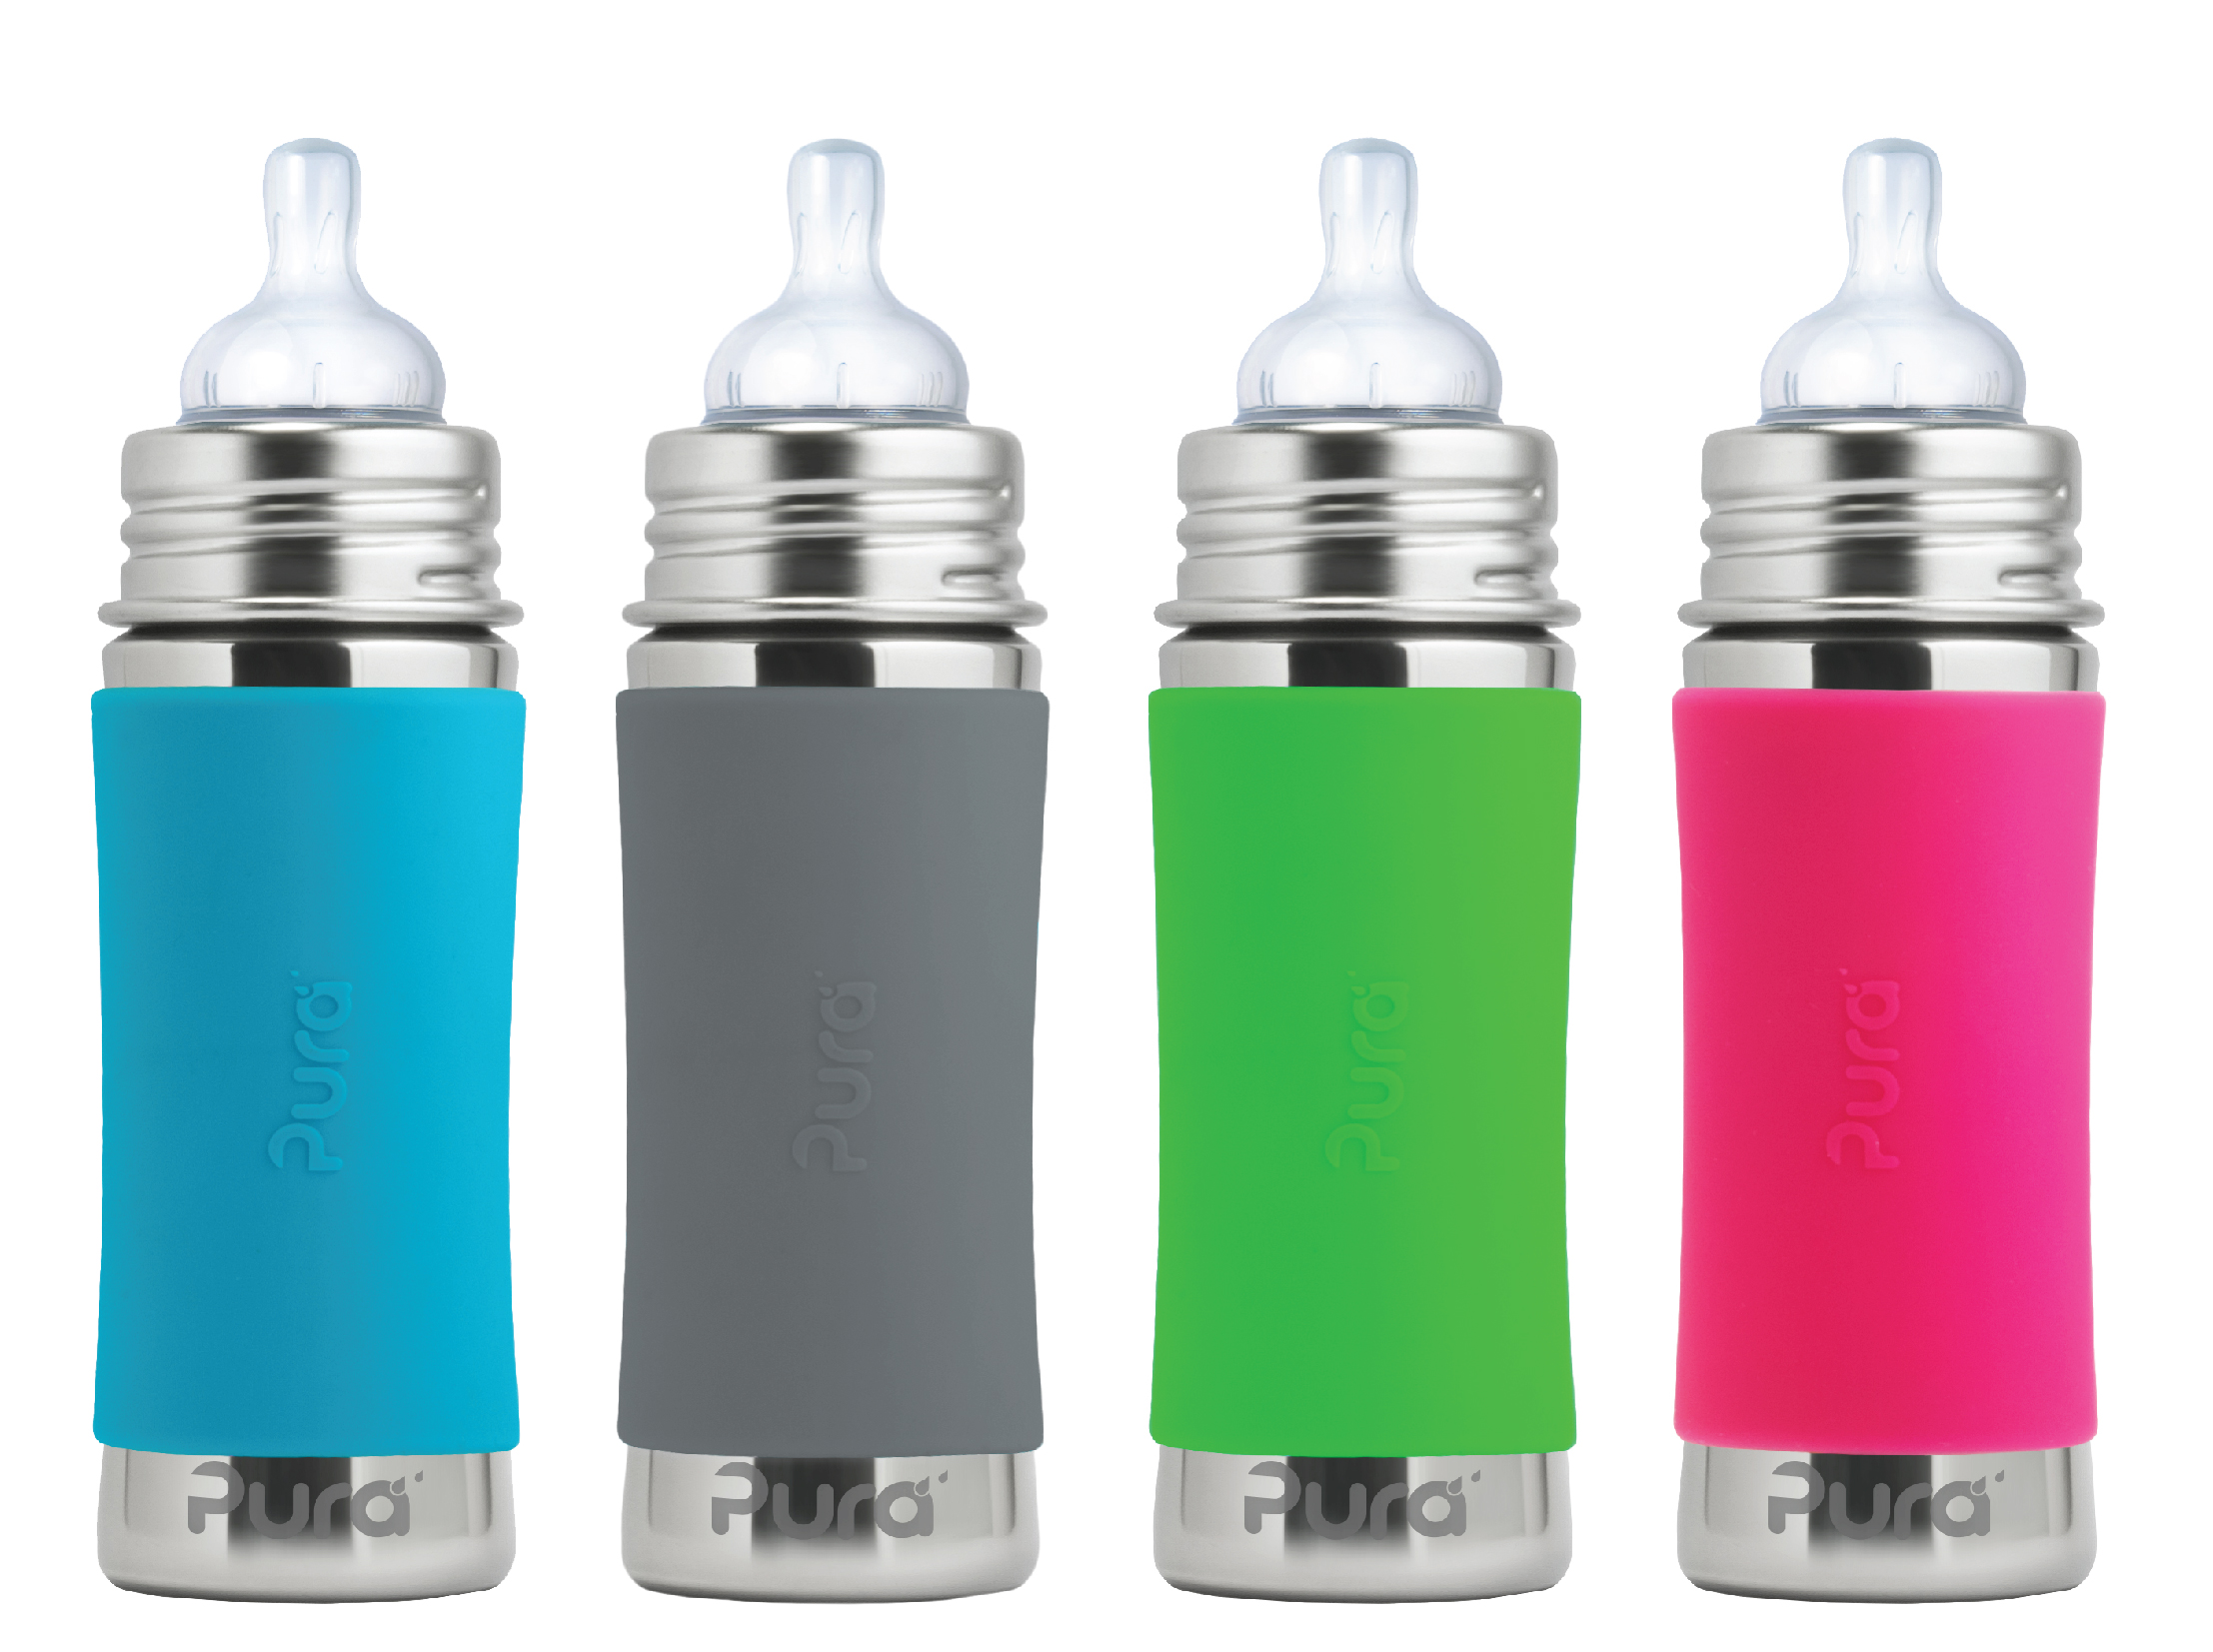 stainless baby bottle